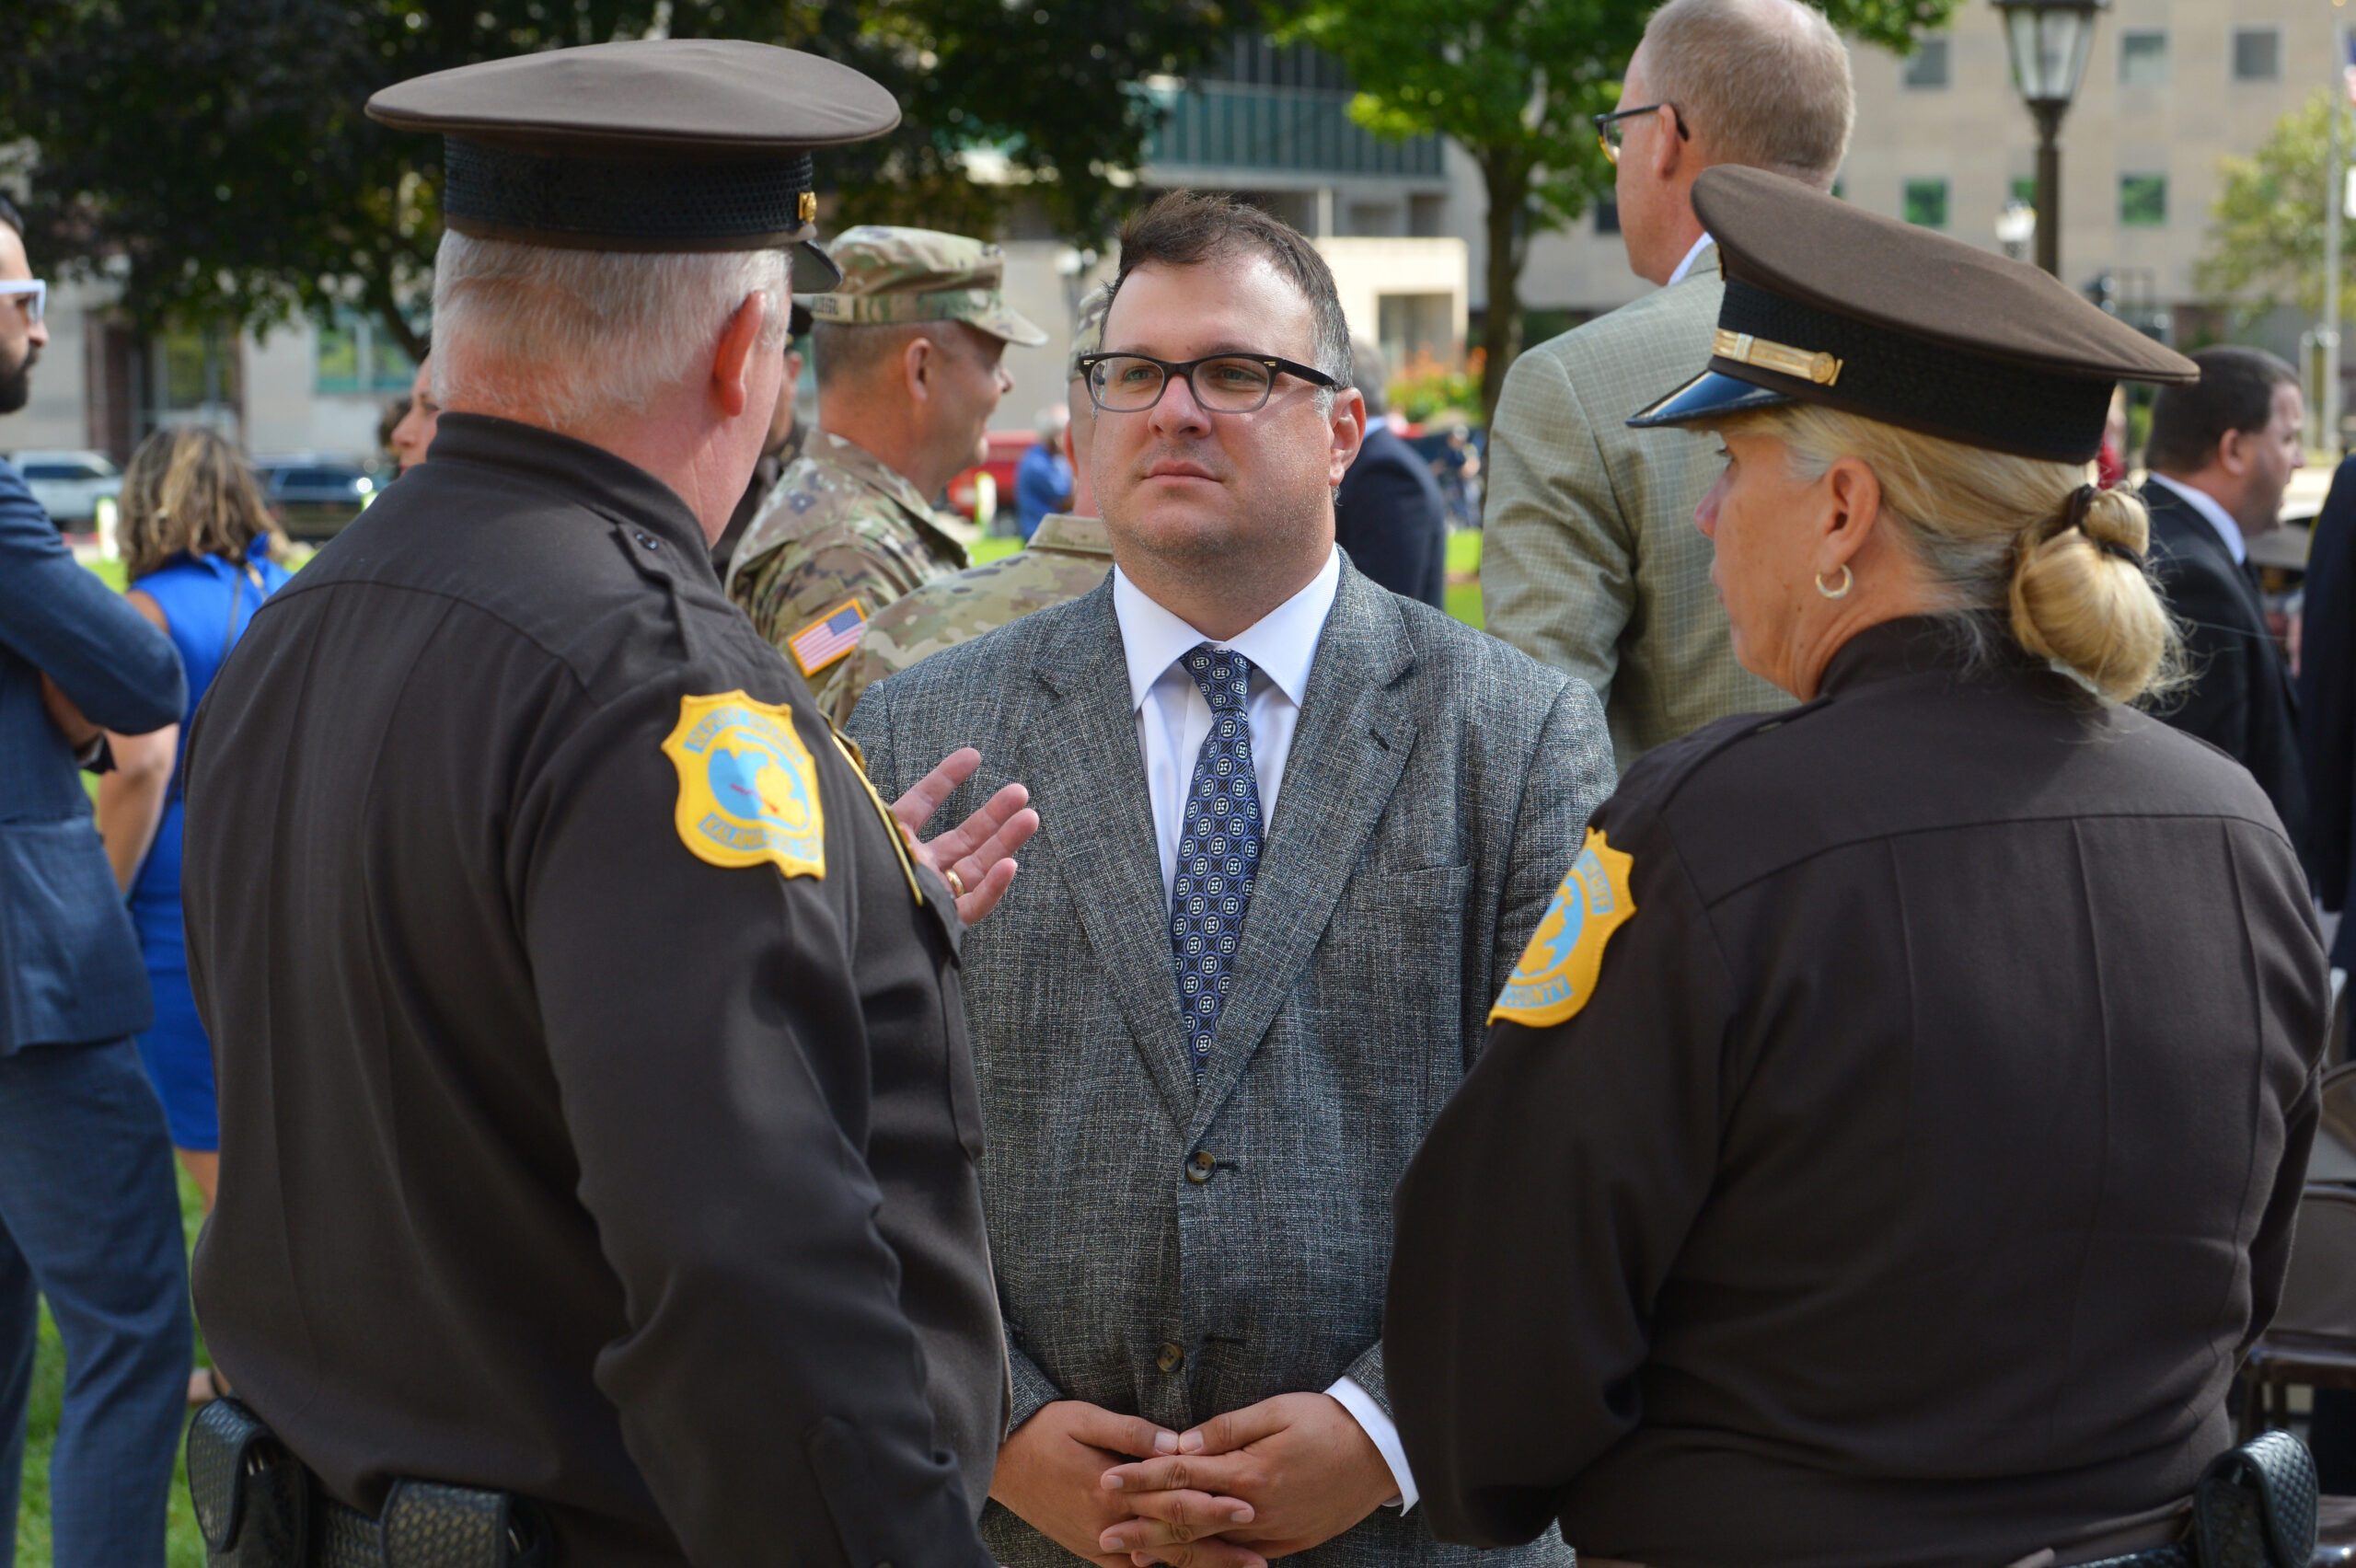 Rep. Matt Hall Fighting for Funding of Local Law Enforcement